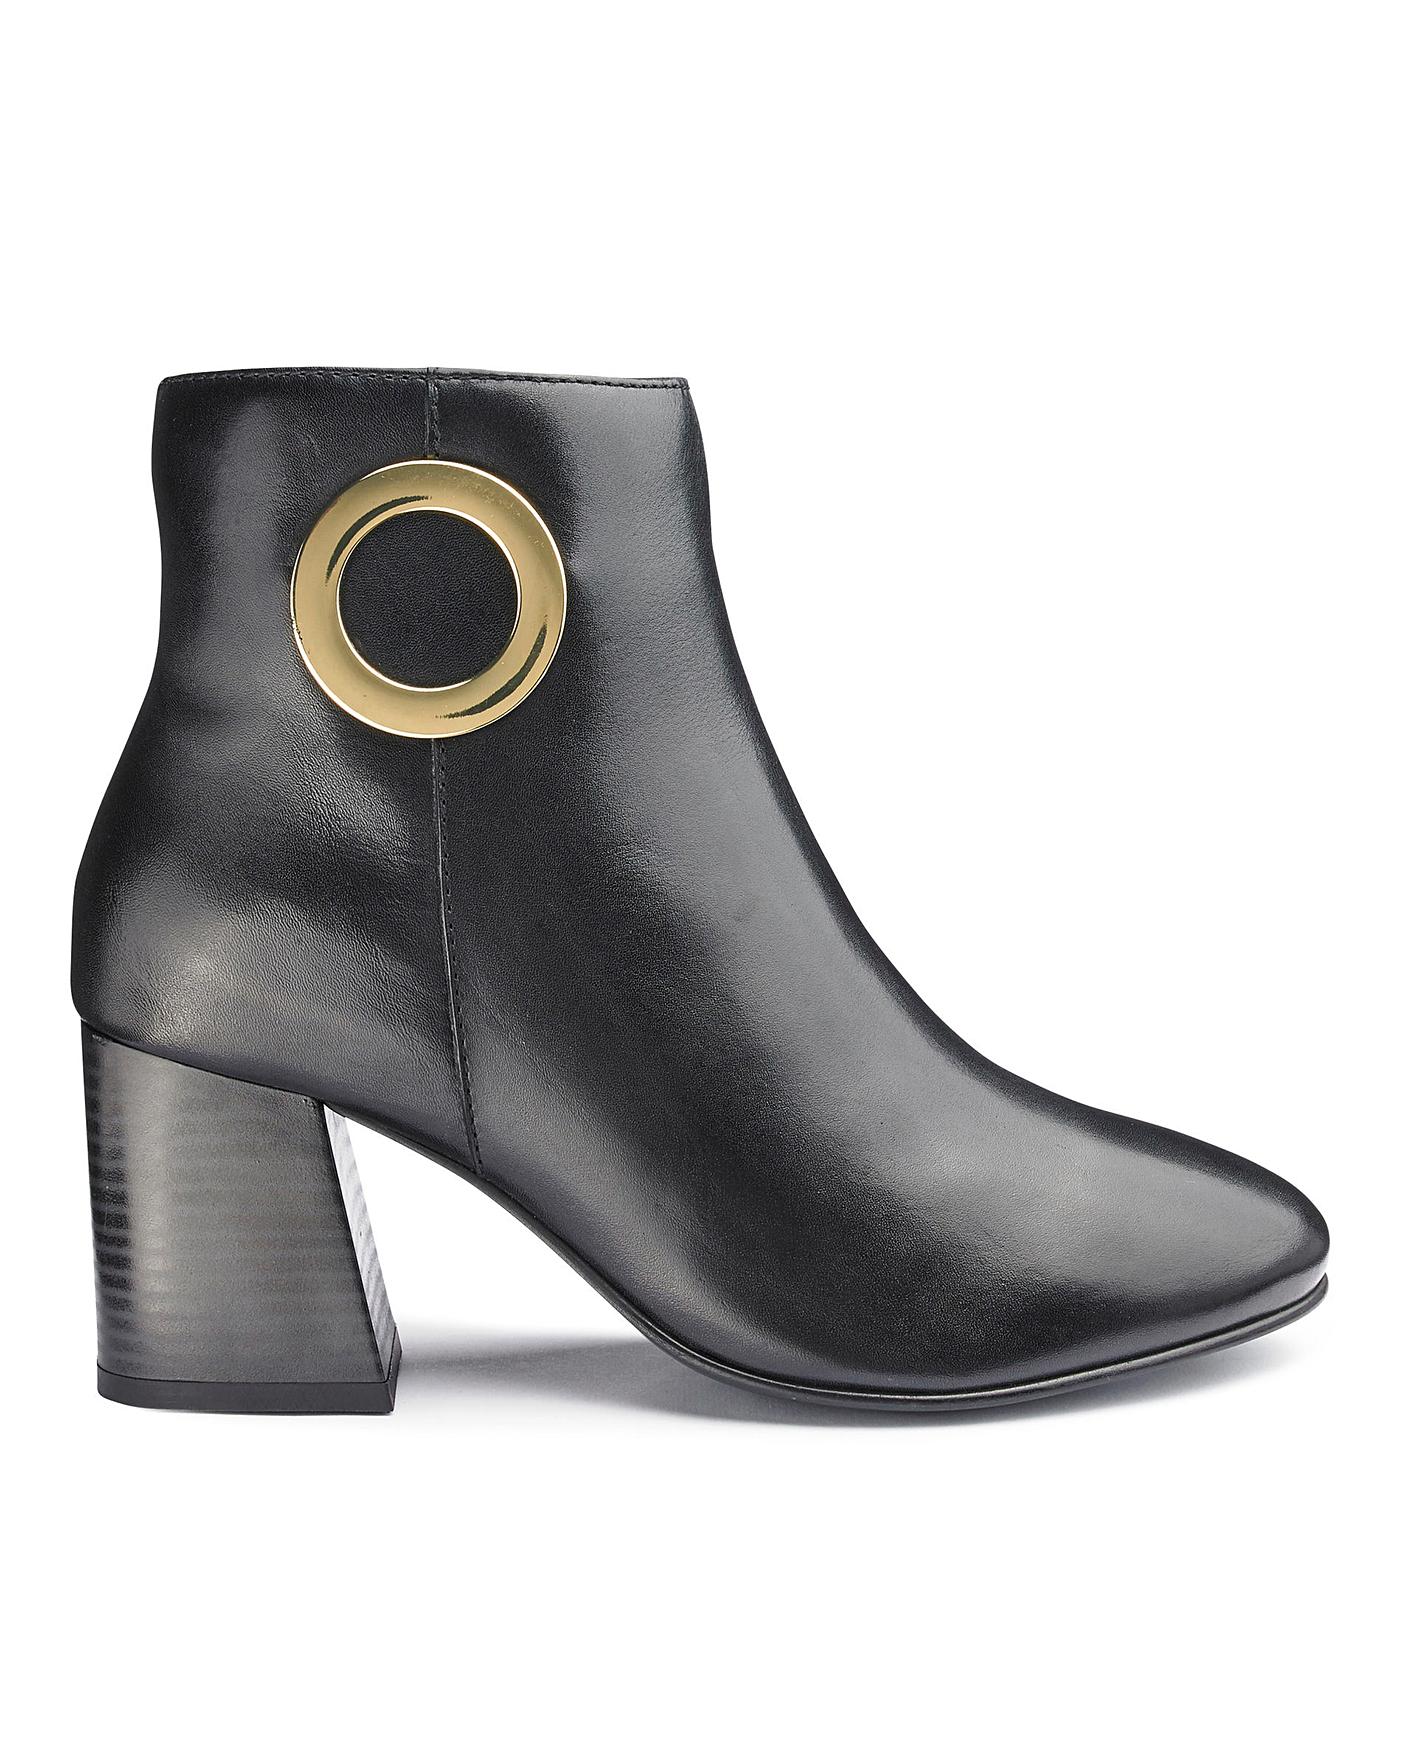 Premium Leather Ankle Boots E Fit 